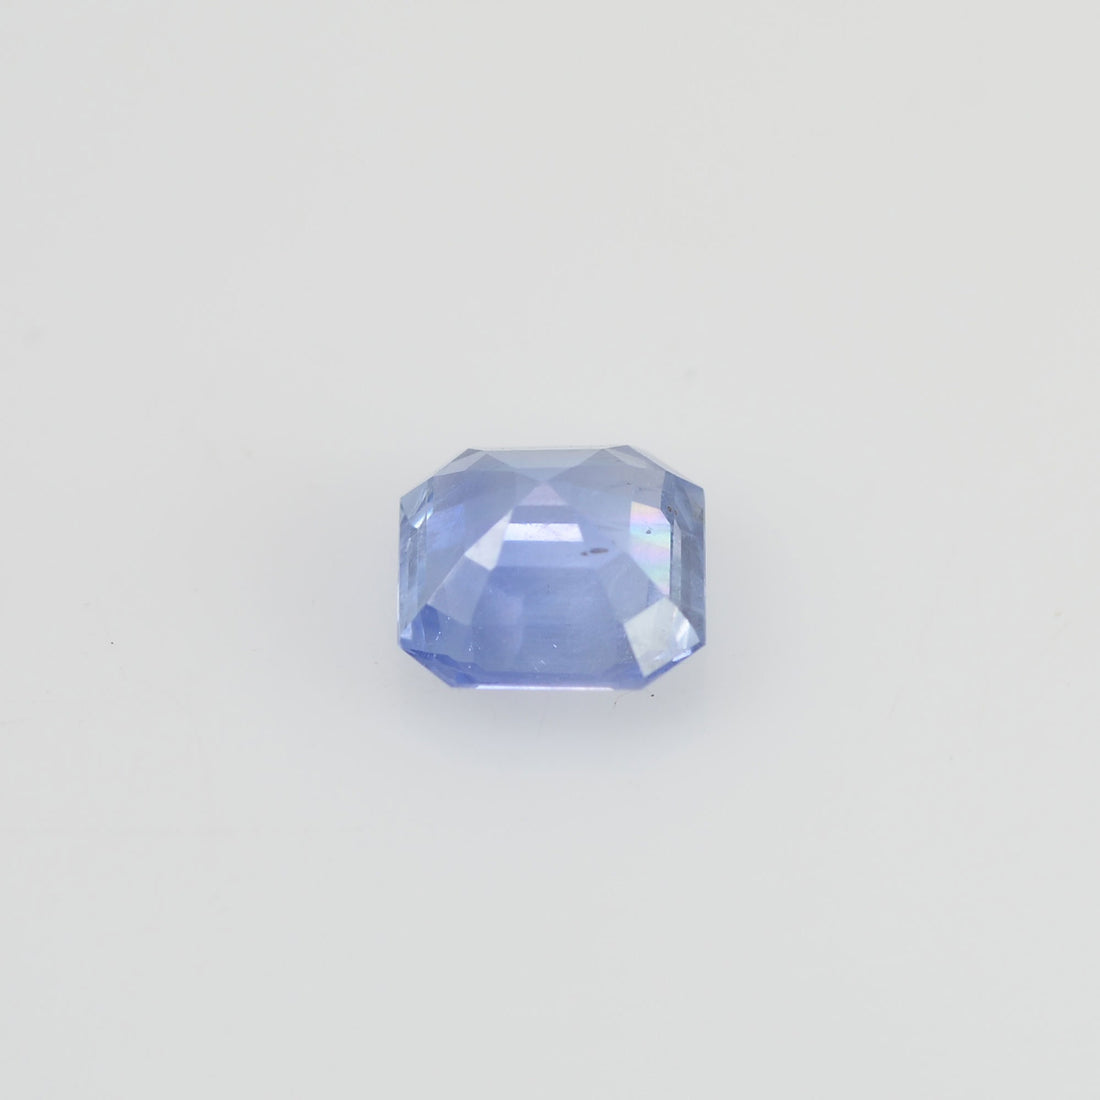 0.87 cts Unheated Natural Blue Sapphire Loose Gemstone Octagon Cut